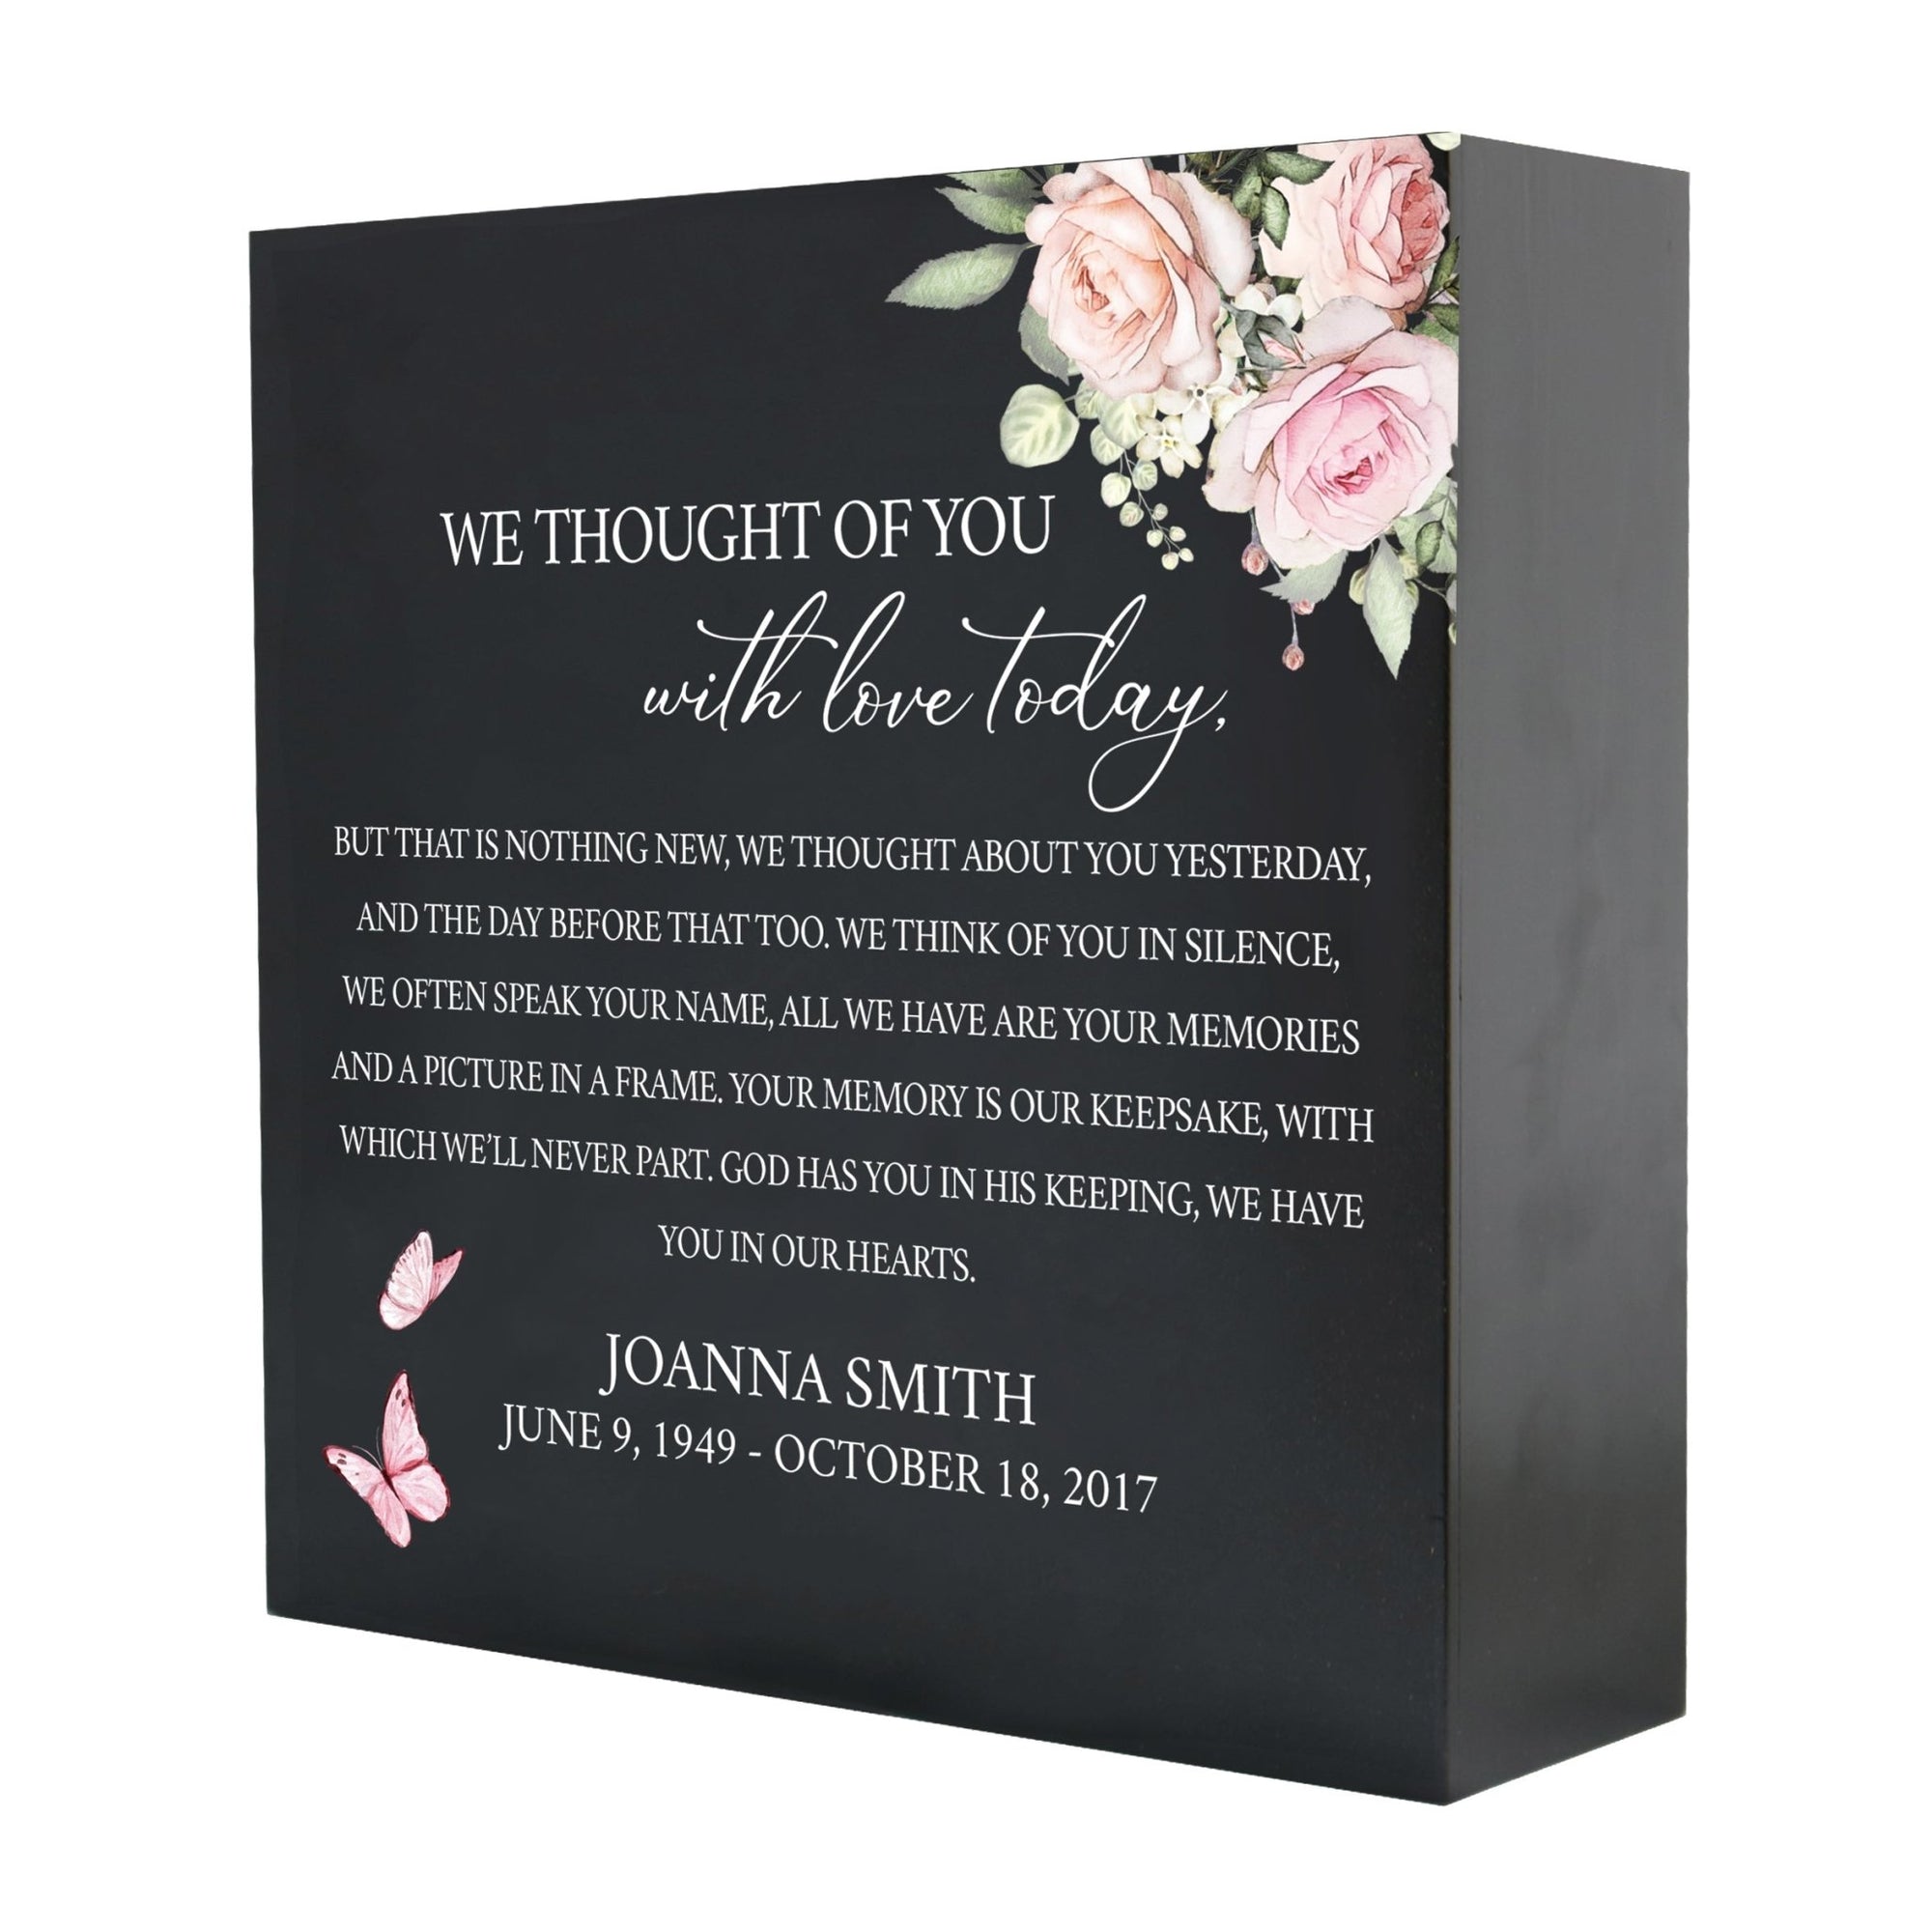 Personalized Modern Inspirational Memorial Wooden Shadow Box and Urn 10x10 holds 189 cu in of Human Ashes - We Thought Of You (Black) - LifeSong Milestones